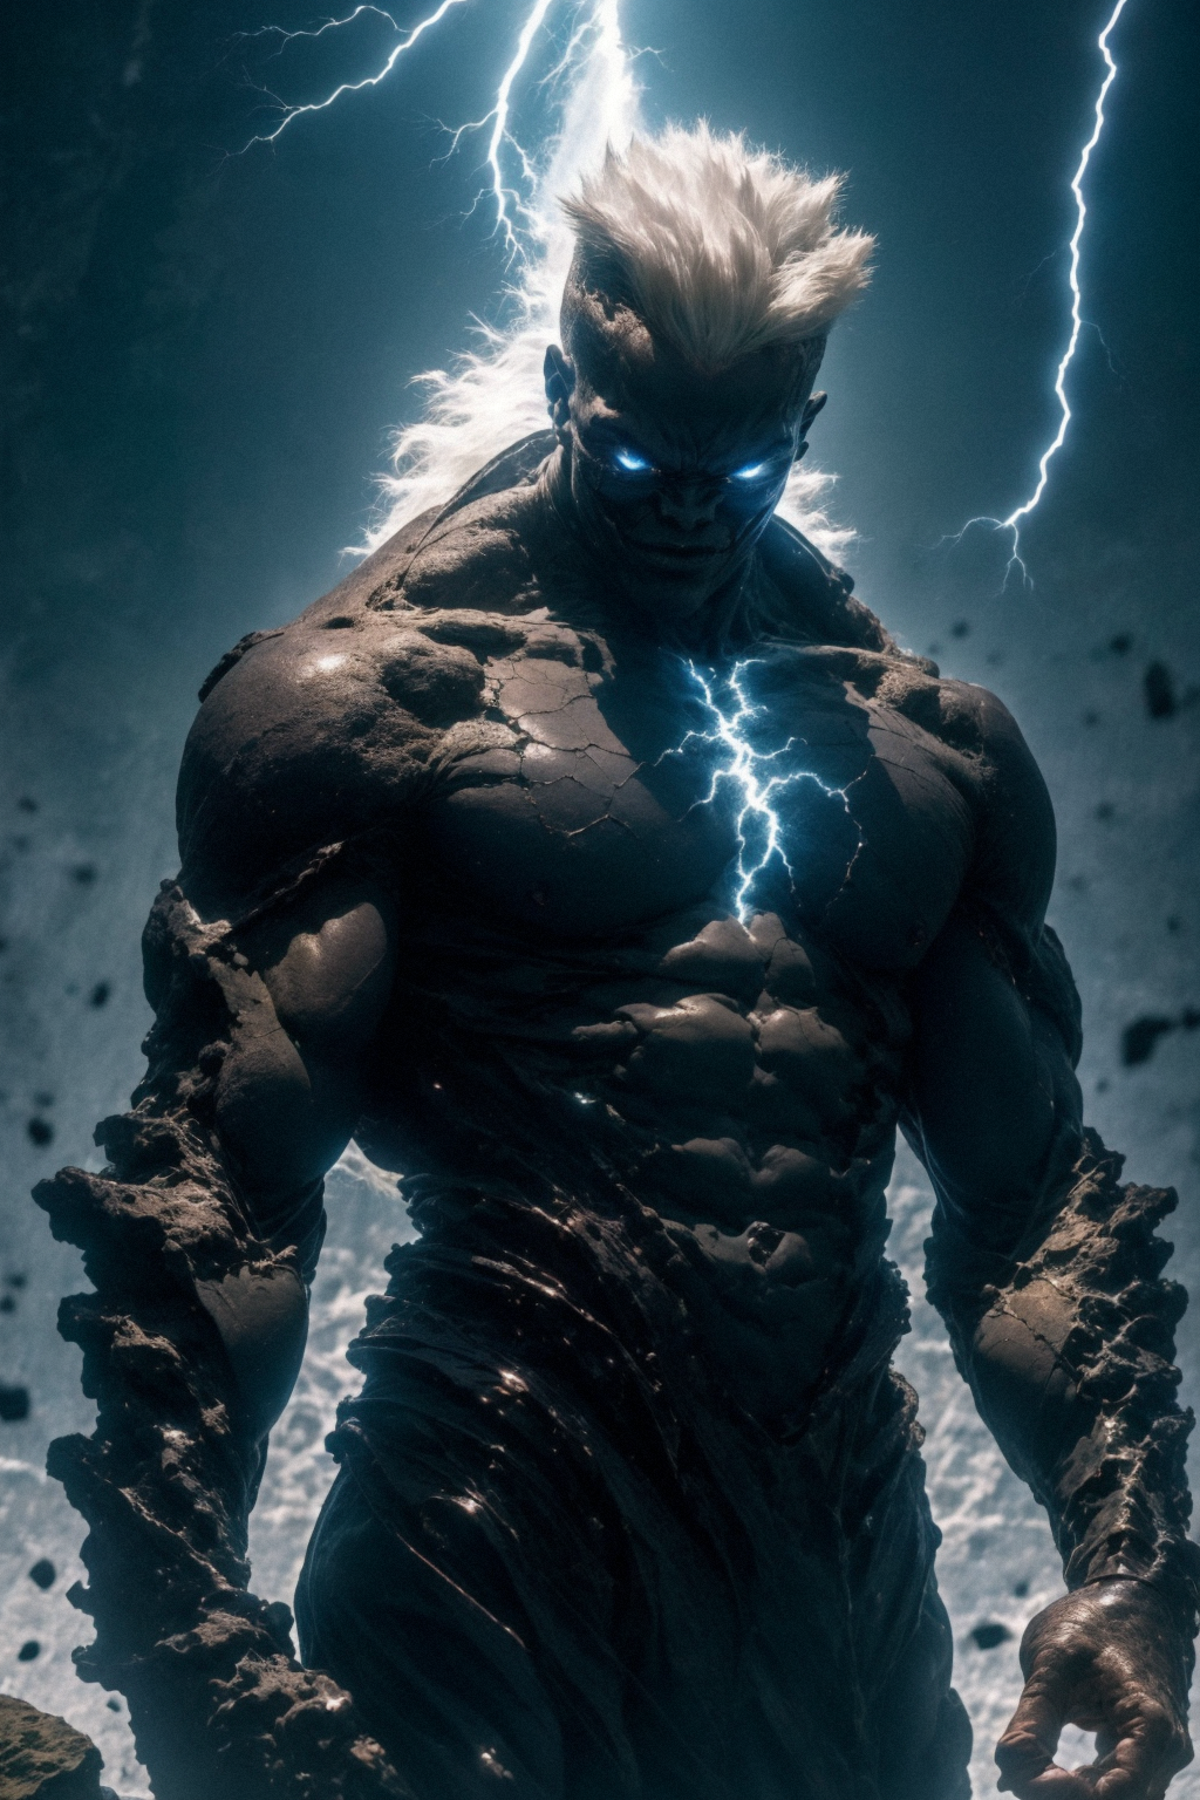 A muscular man with electrical bolts coming out of his chest and blue eyes.